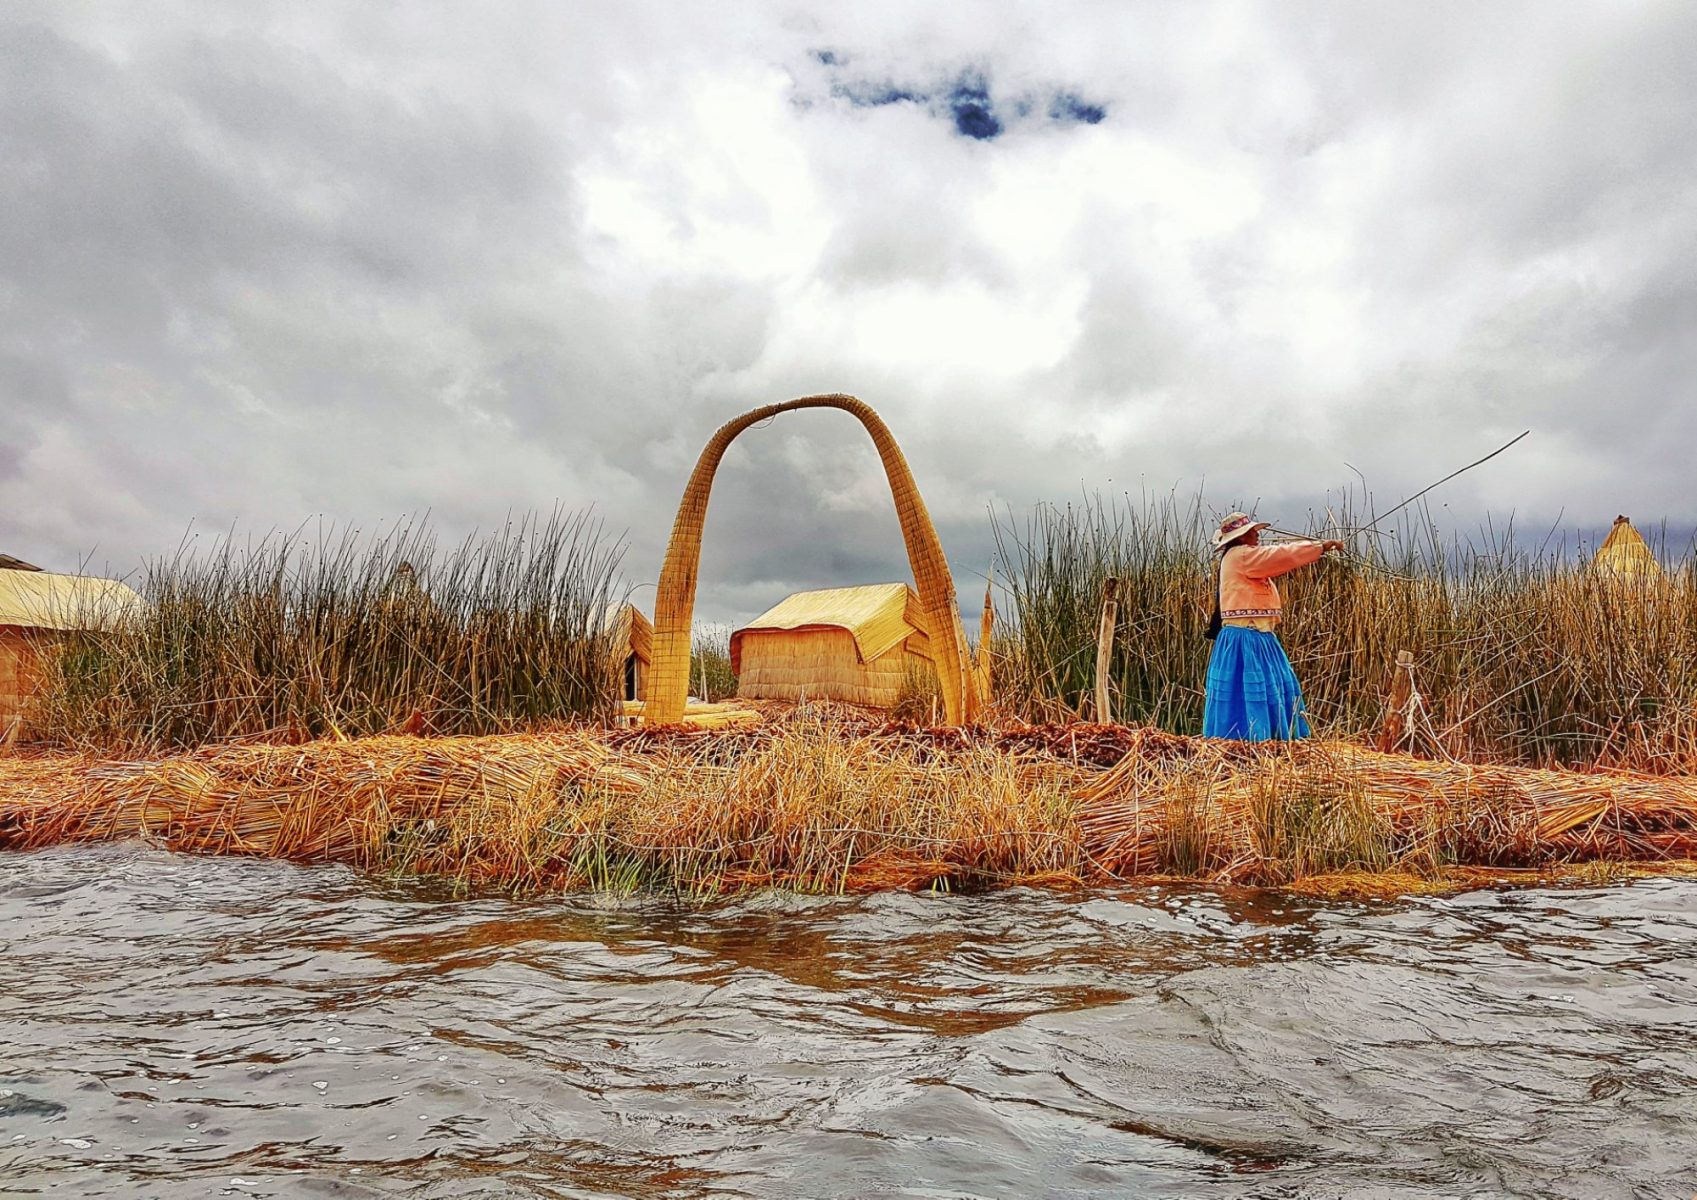 <img src="images/" width="800" height="600" alt="uros titinos - wp image 70891372 - Peru: Uros Titinos, The Real Floating Reed Islands ">